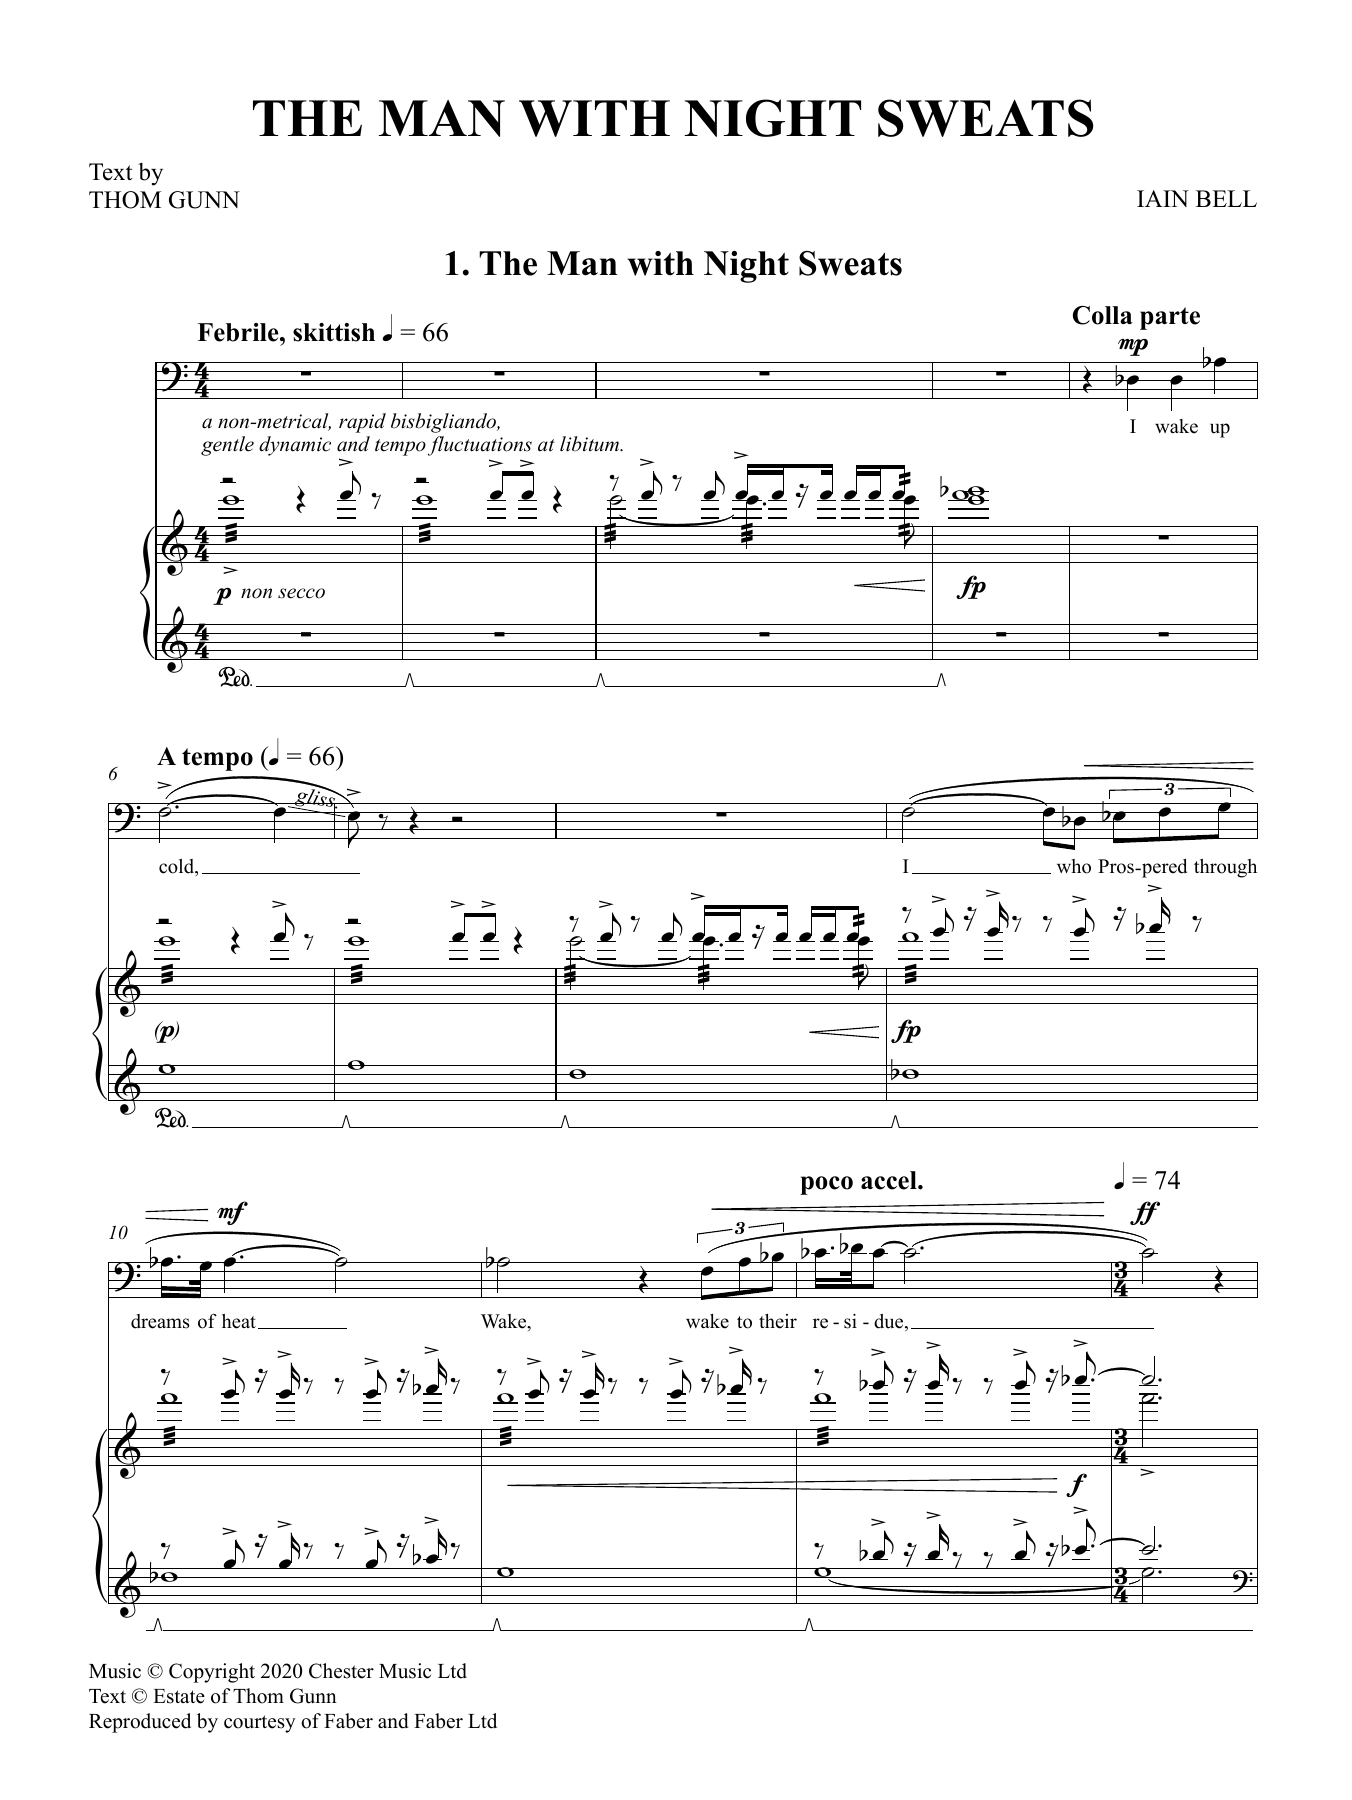 Iain Bell The Man With Night Sweats sheet music notes printable PDF score